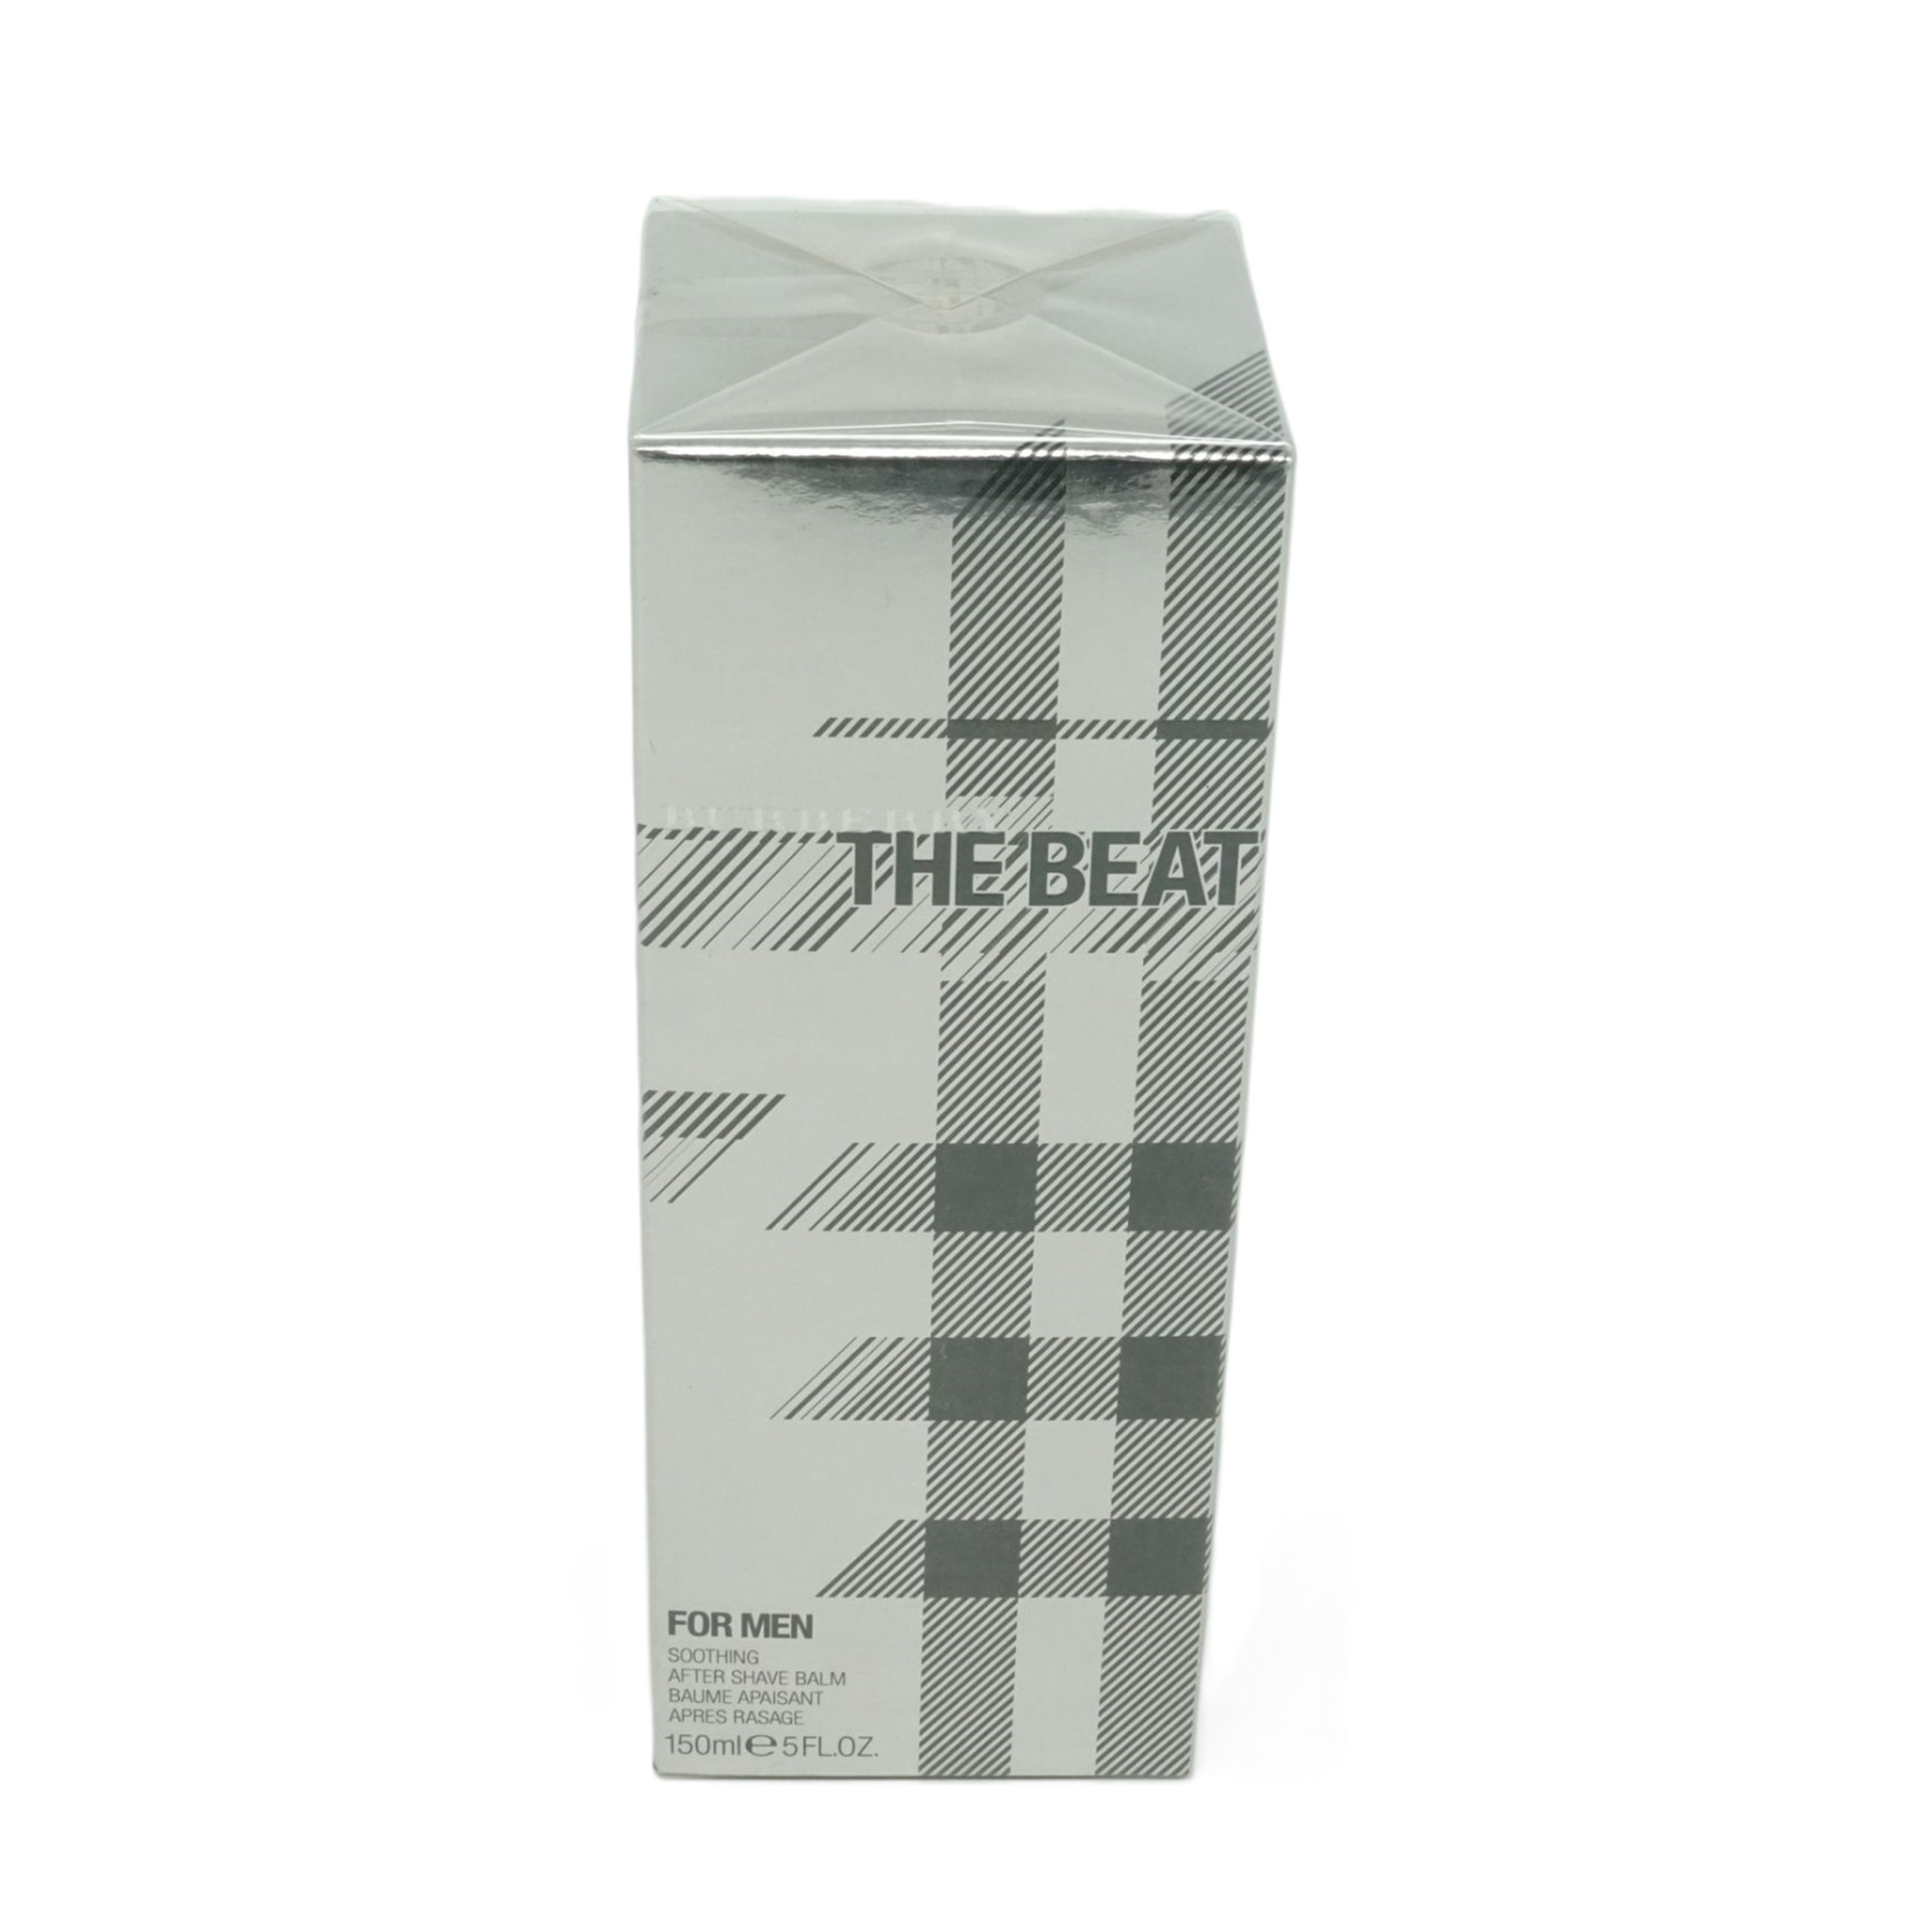 Burberry The Beat For Men After Shave Balm 150ml